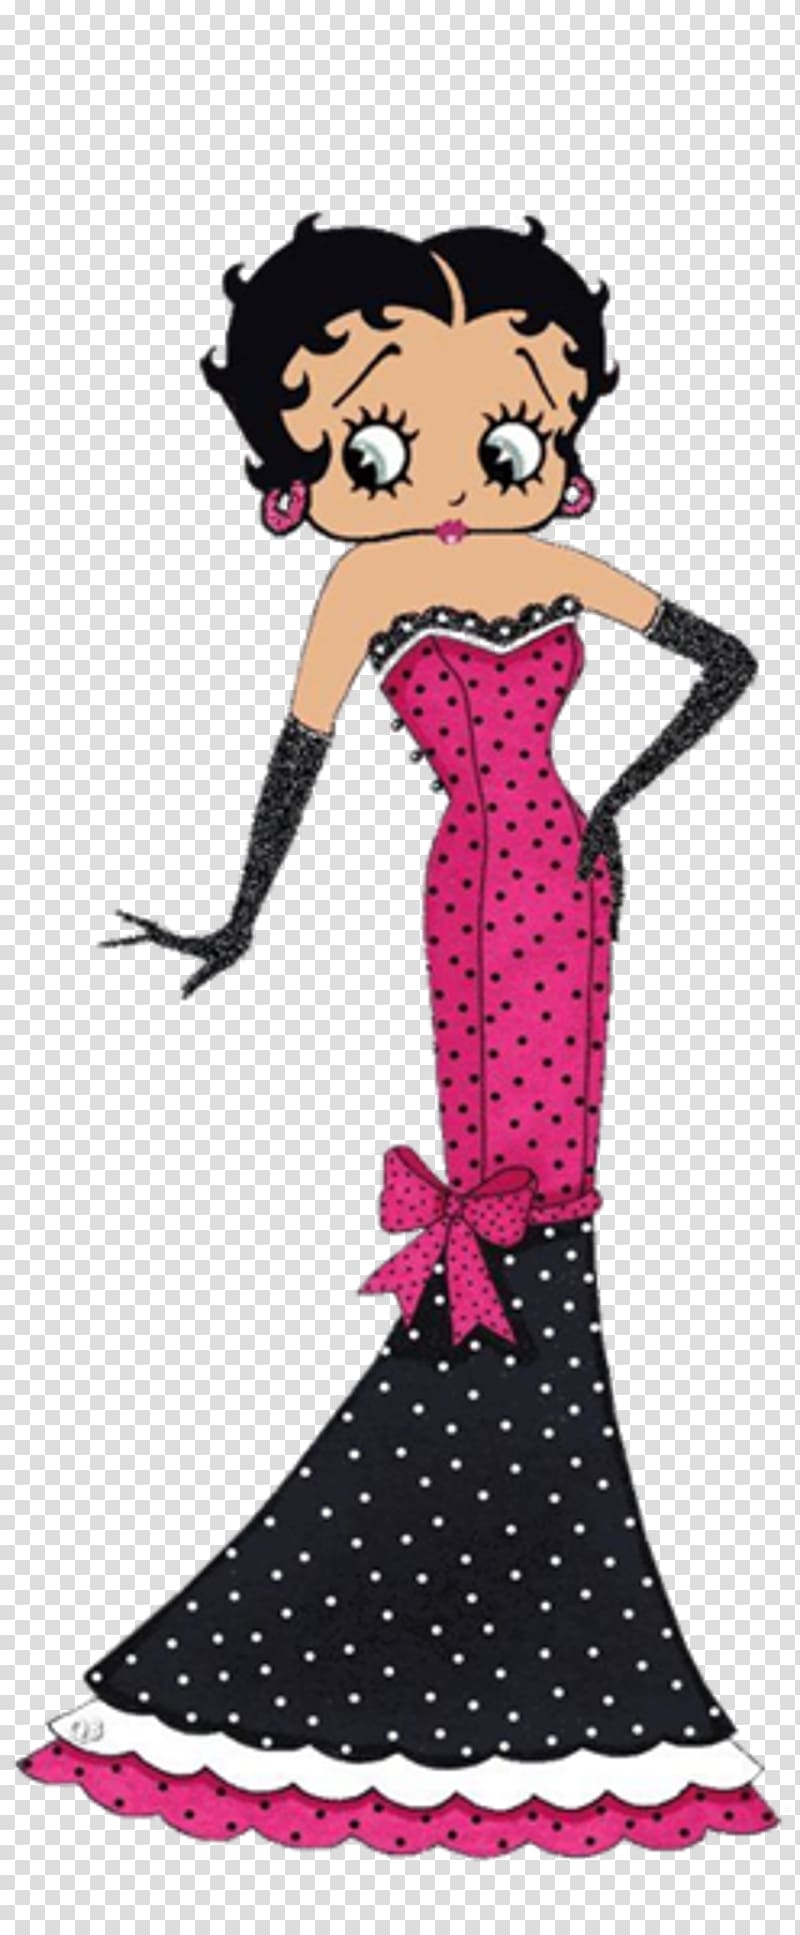 Betty Boop Animated cartoon Jazz Age Animation, Animation transparent background PNG clipart